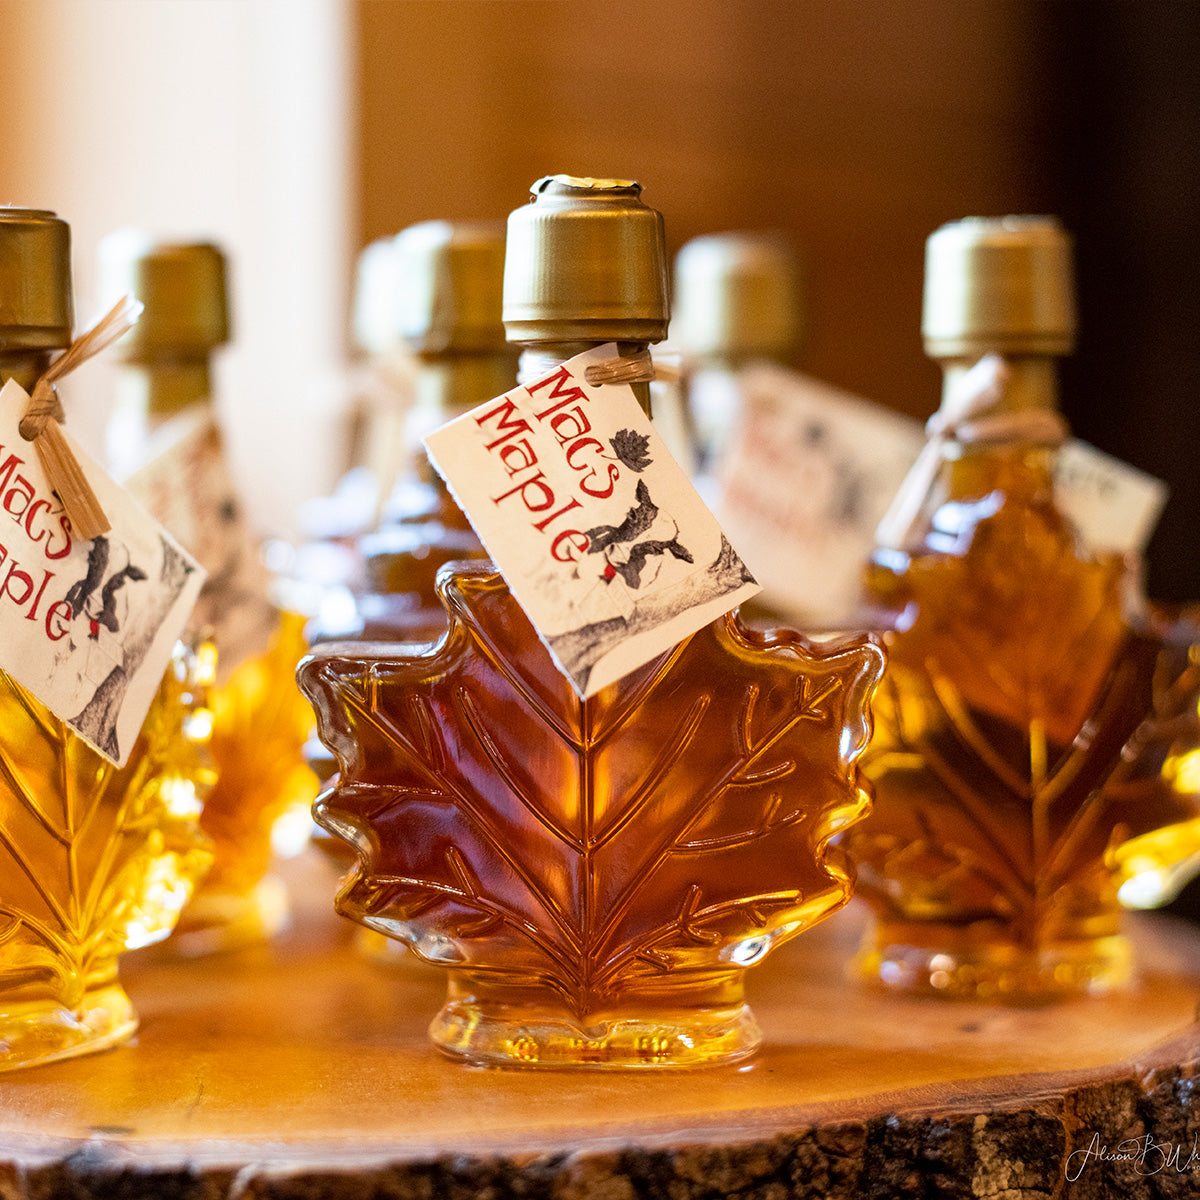 Glass Maple Leaf NH Maple Syrup – Mac's Maple